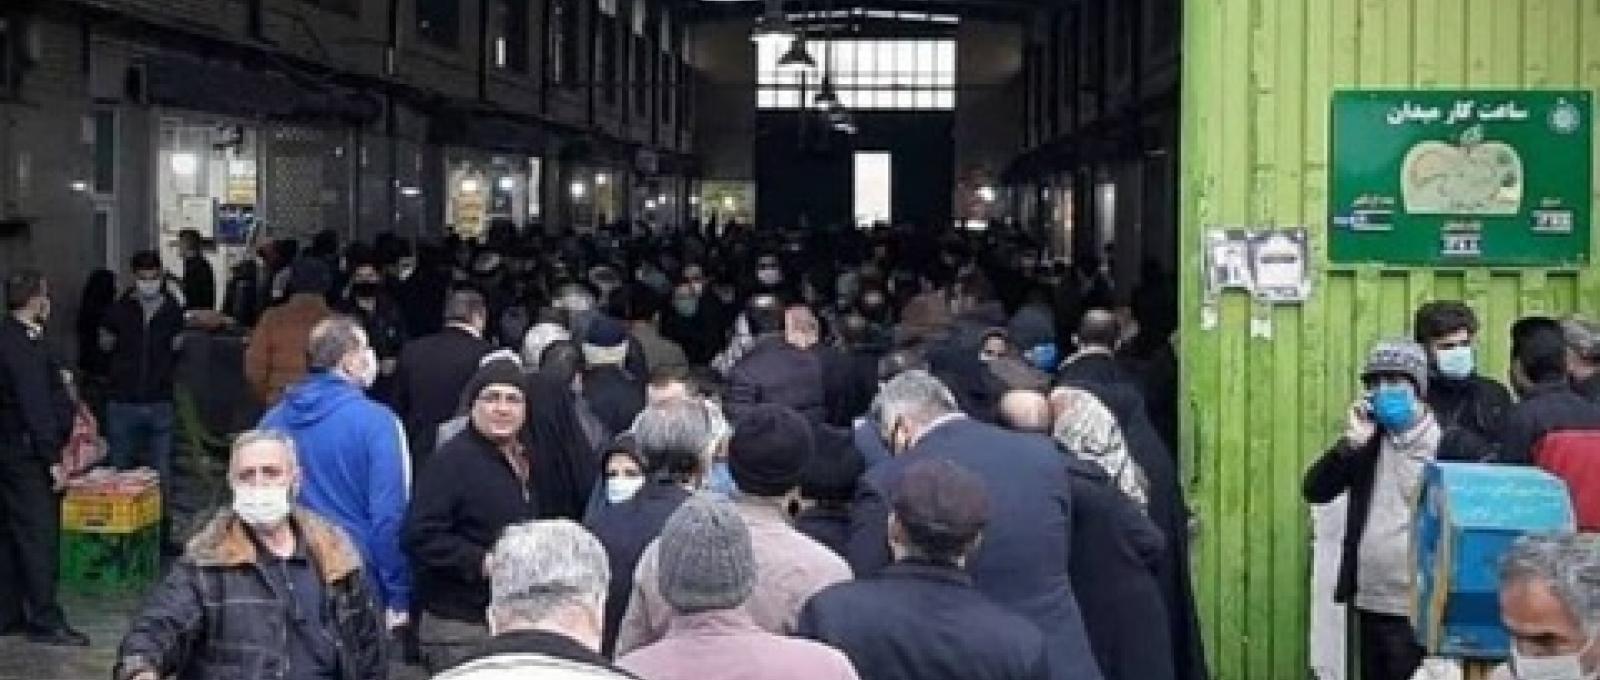 Long cues in Tehran at a chicken market as prices soar. November 25, 2020